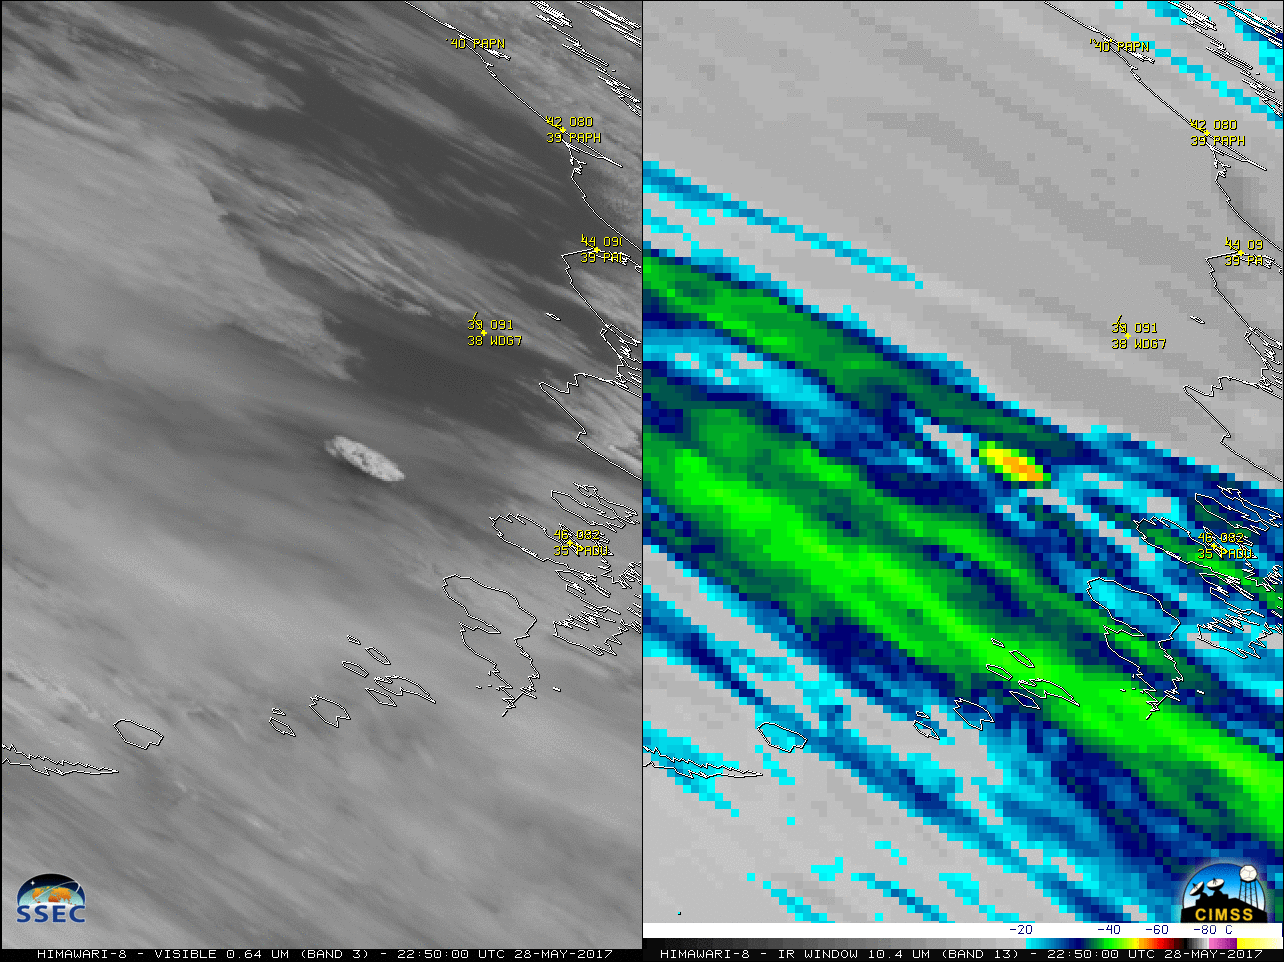 Himawari-8 Visible (0.64 µm, left) and Infrared Window (10.4 µm, right) images, with hourly surface and ship reports plotted in yellow [click to play animation]